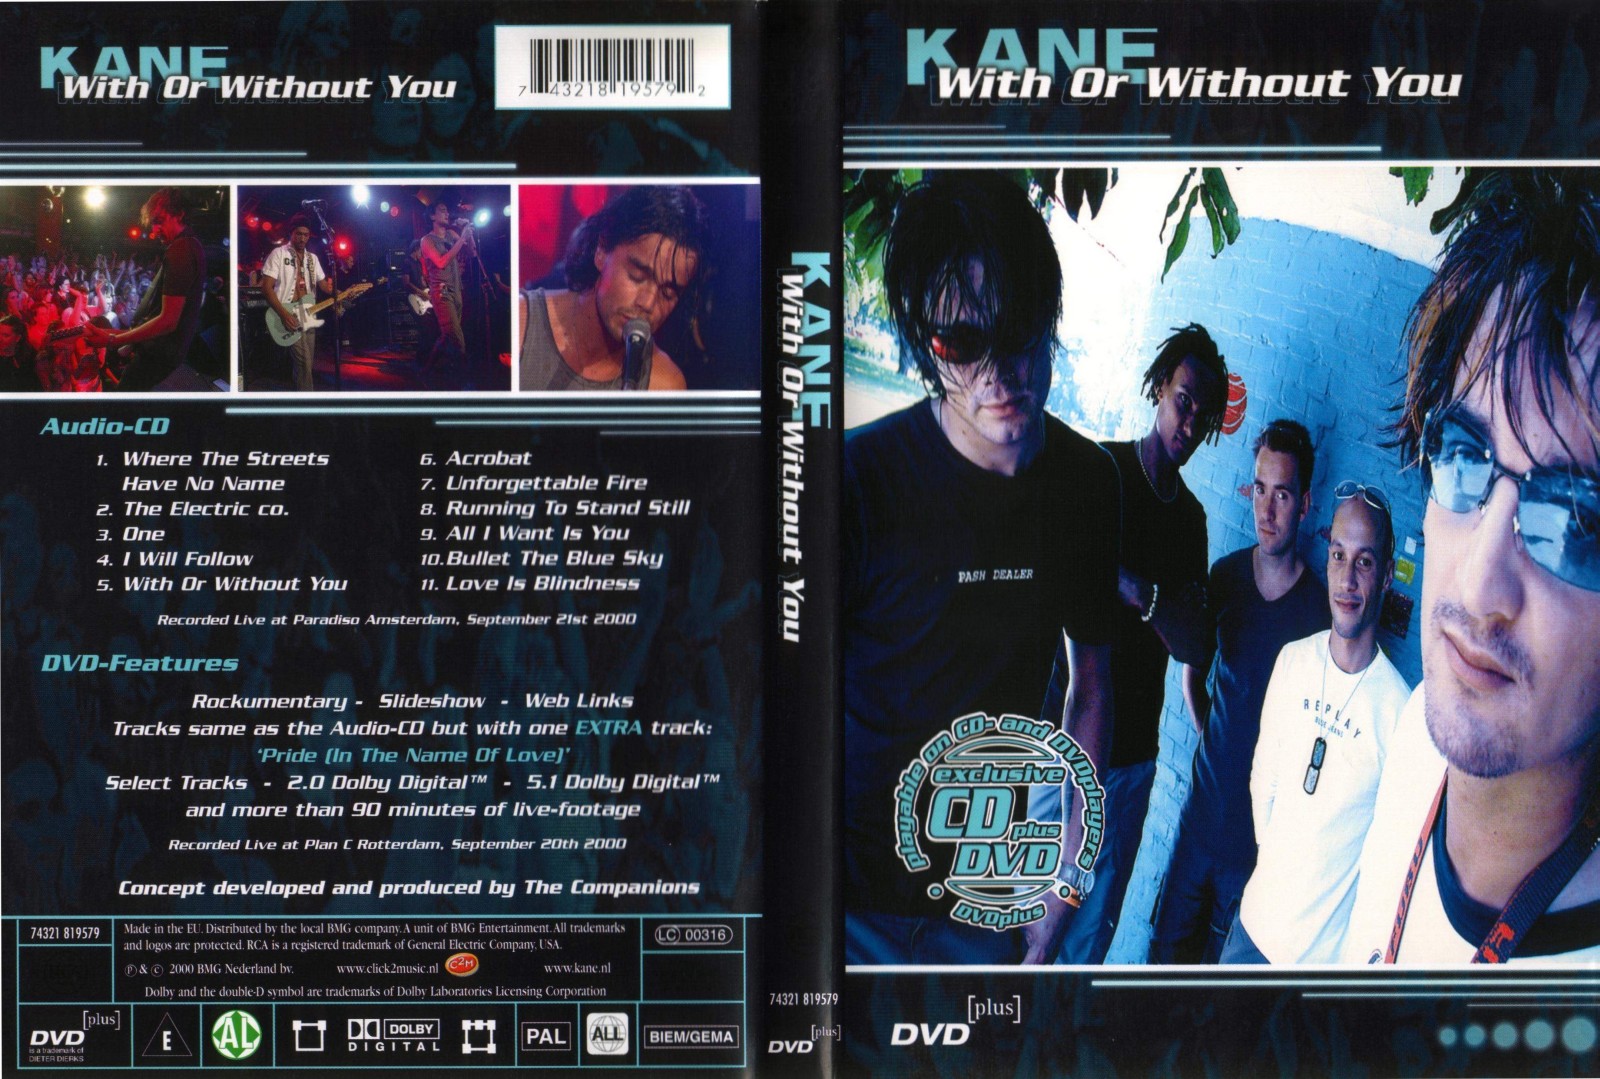 Jaquette DVD Kane with or without you